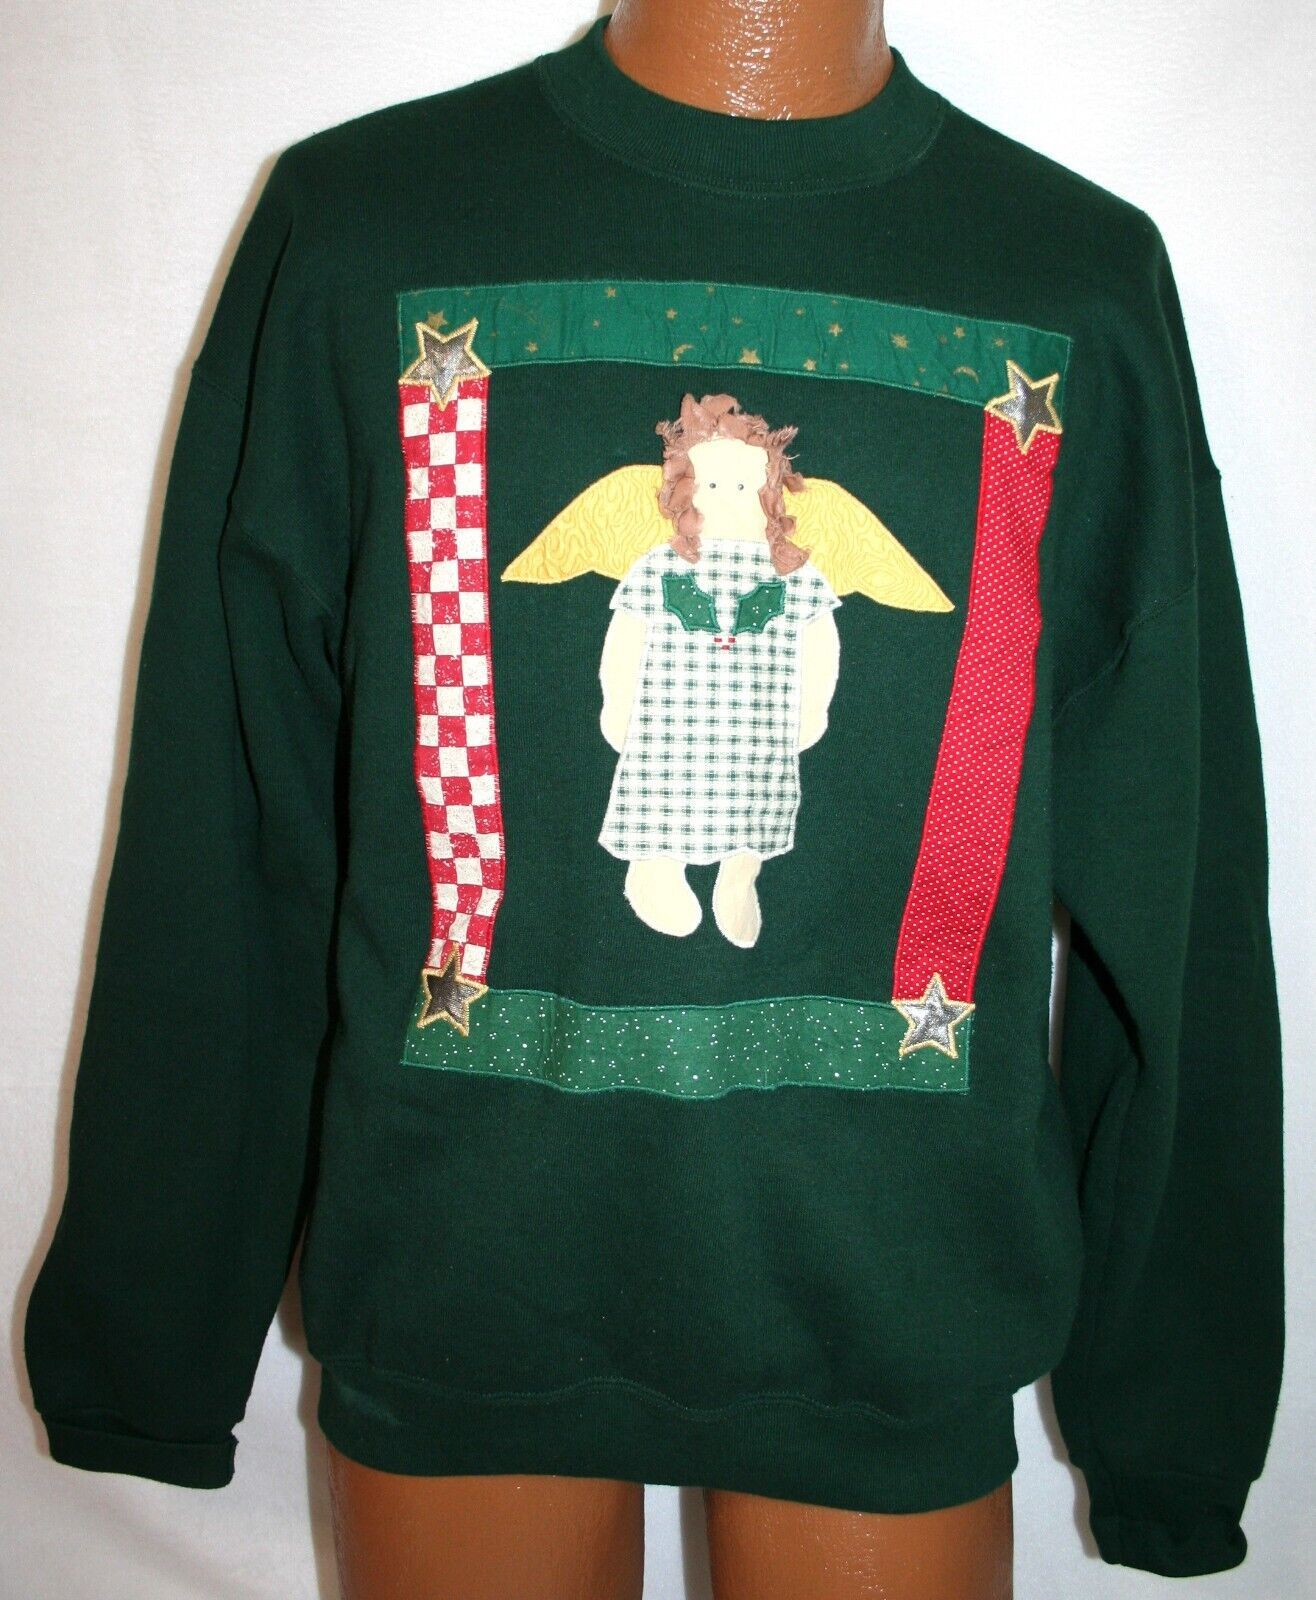 Primary image for Vintage 80s CHRISTMAS ANGEL Patchwork UGLY Christmas Sweater SWEATSHIRT XL